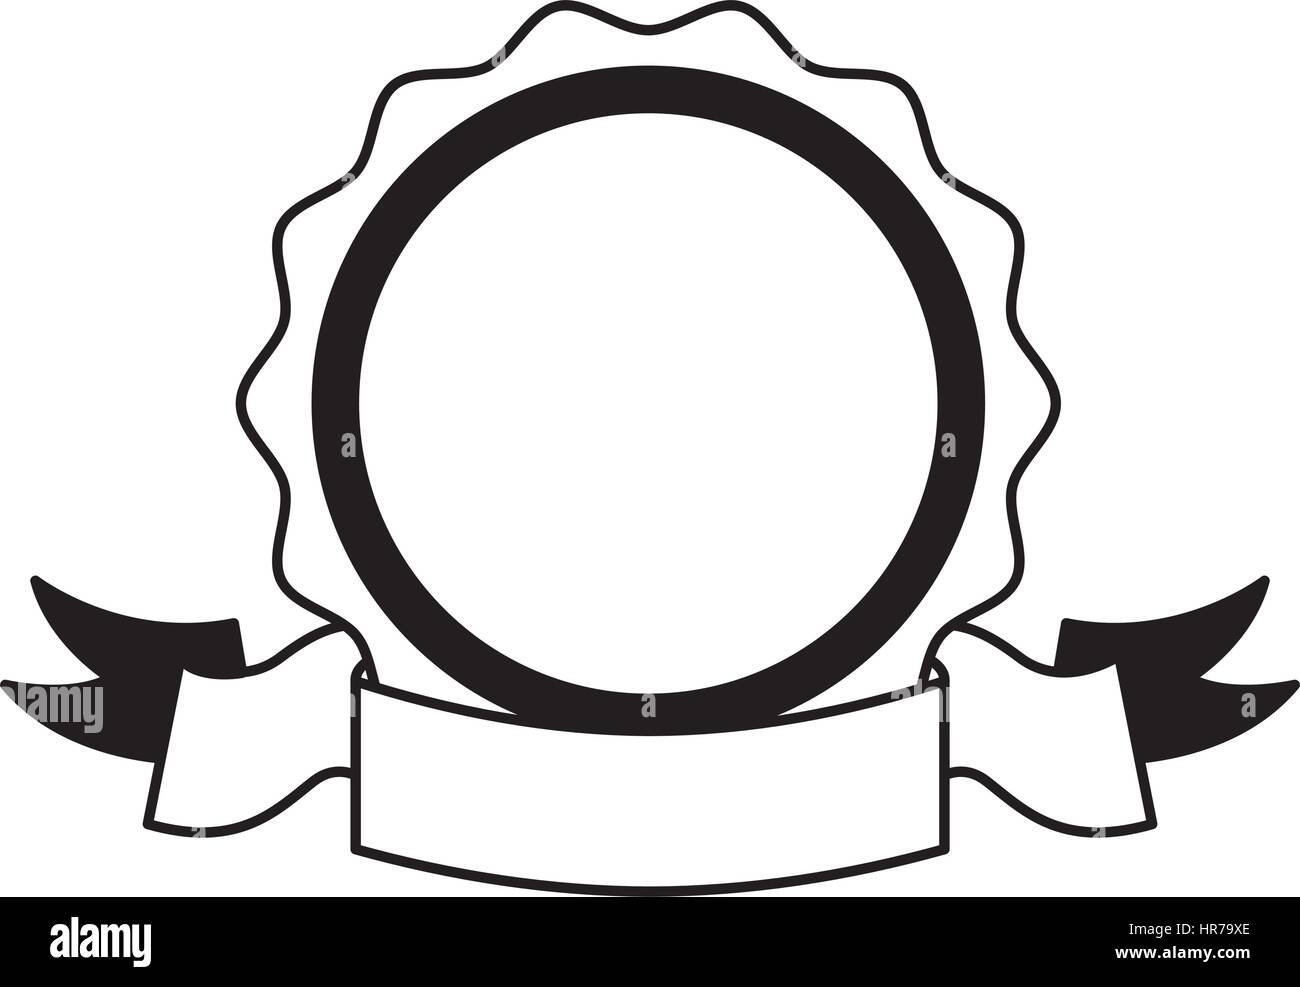 Circle Seal Stamp Icon High Resolution Stock Photography and Images - Alamy